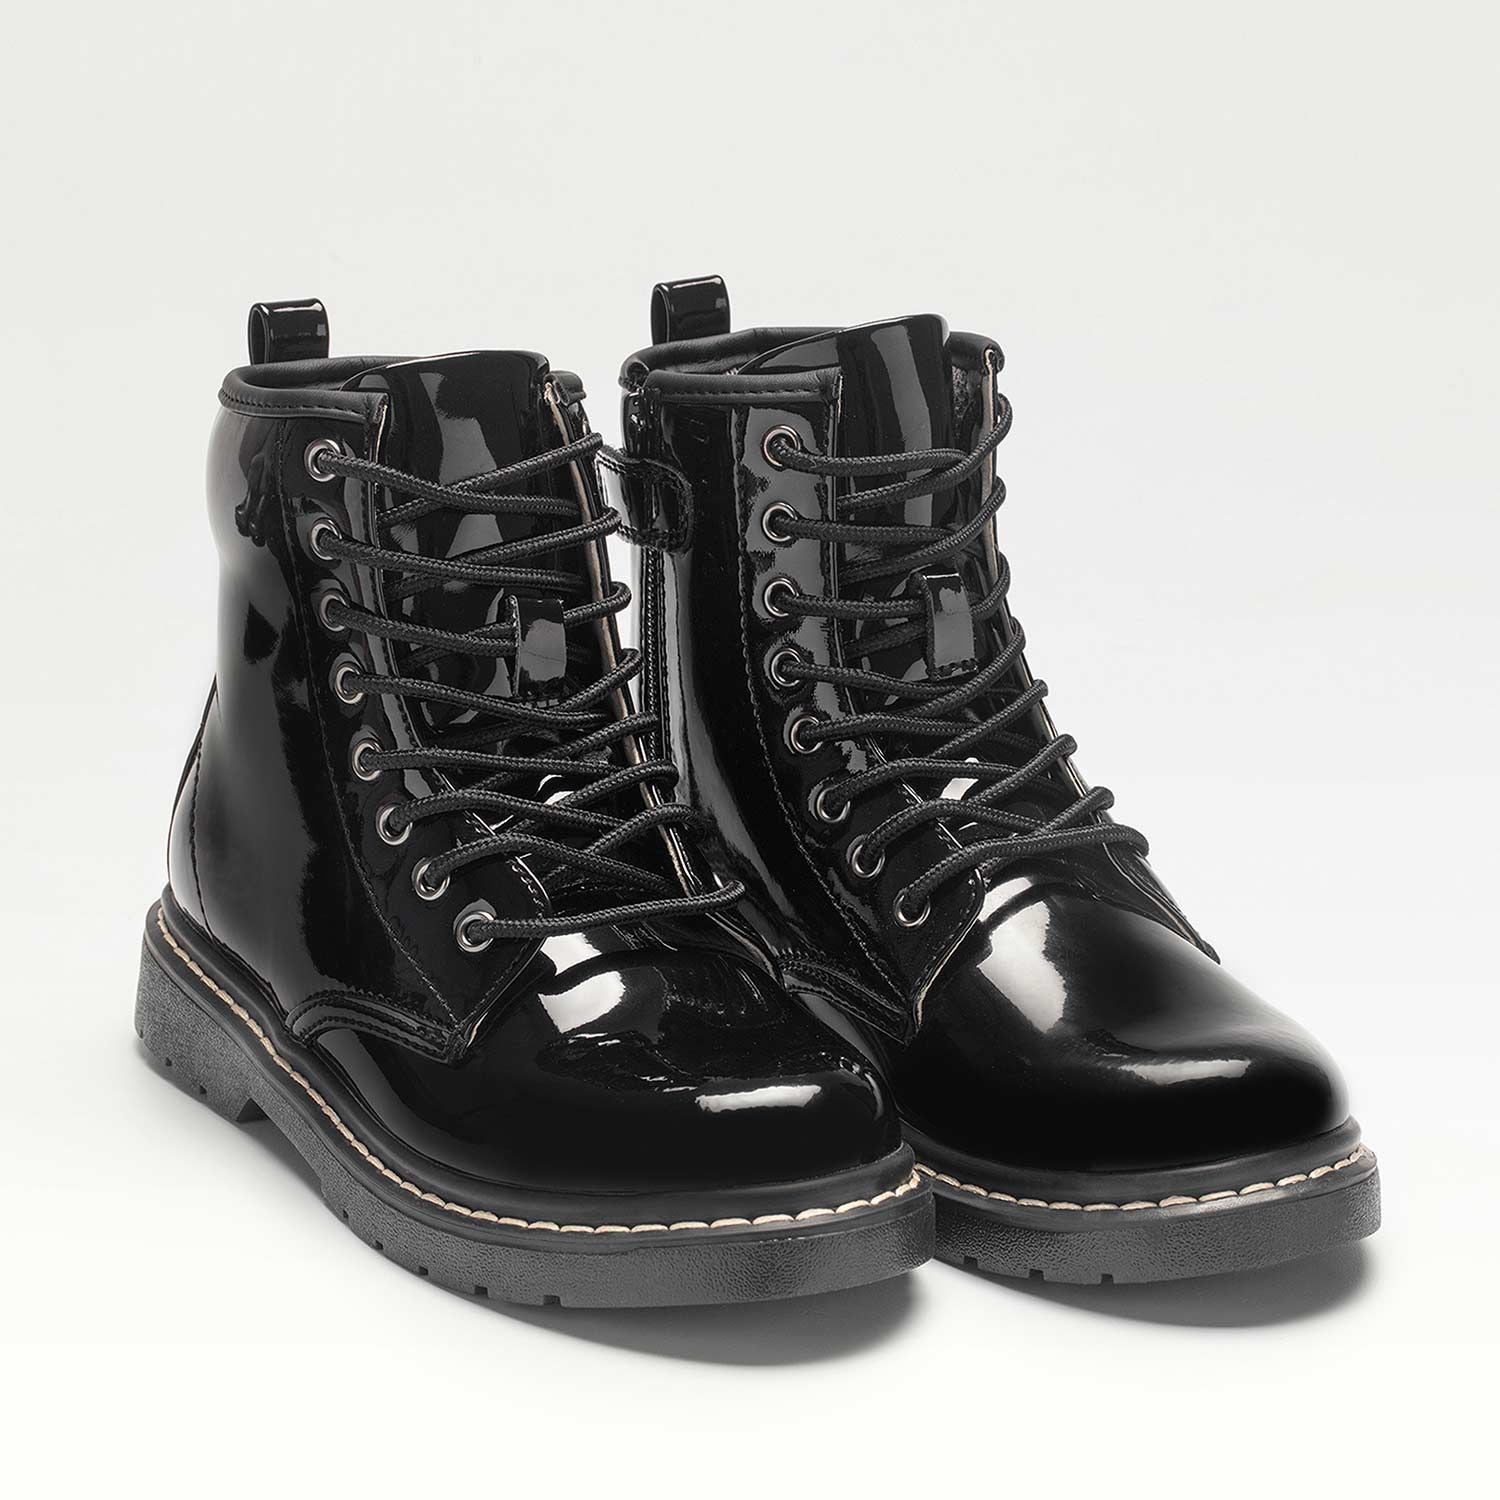 A pair of girls school boots by Lelli Kelly, style Sofia, in black patent with lace and zip fastening. Right side view.